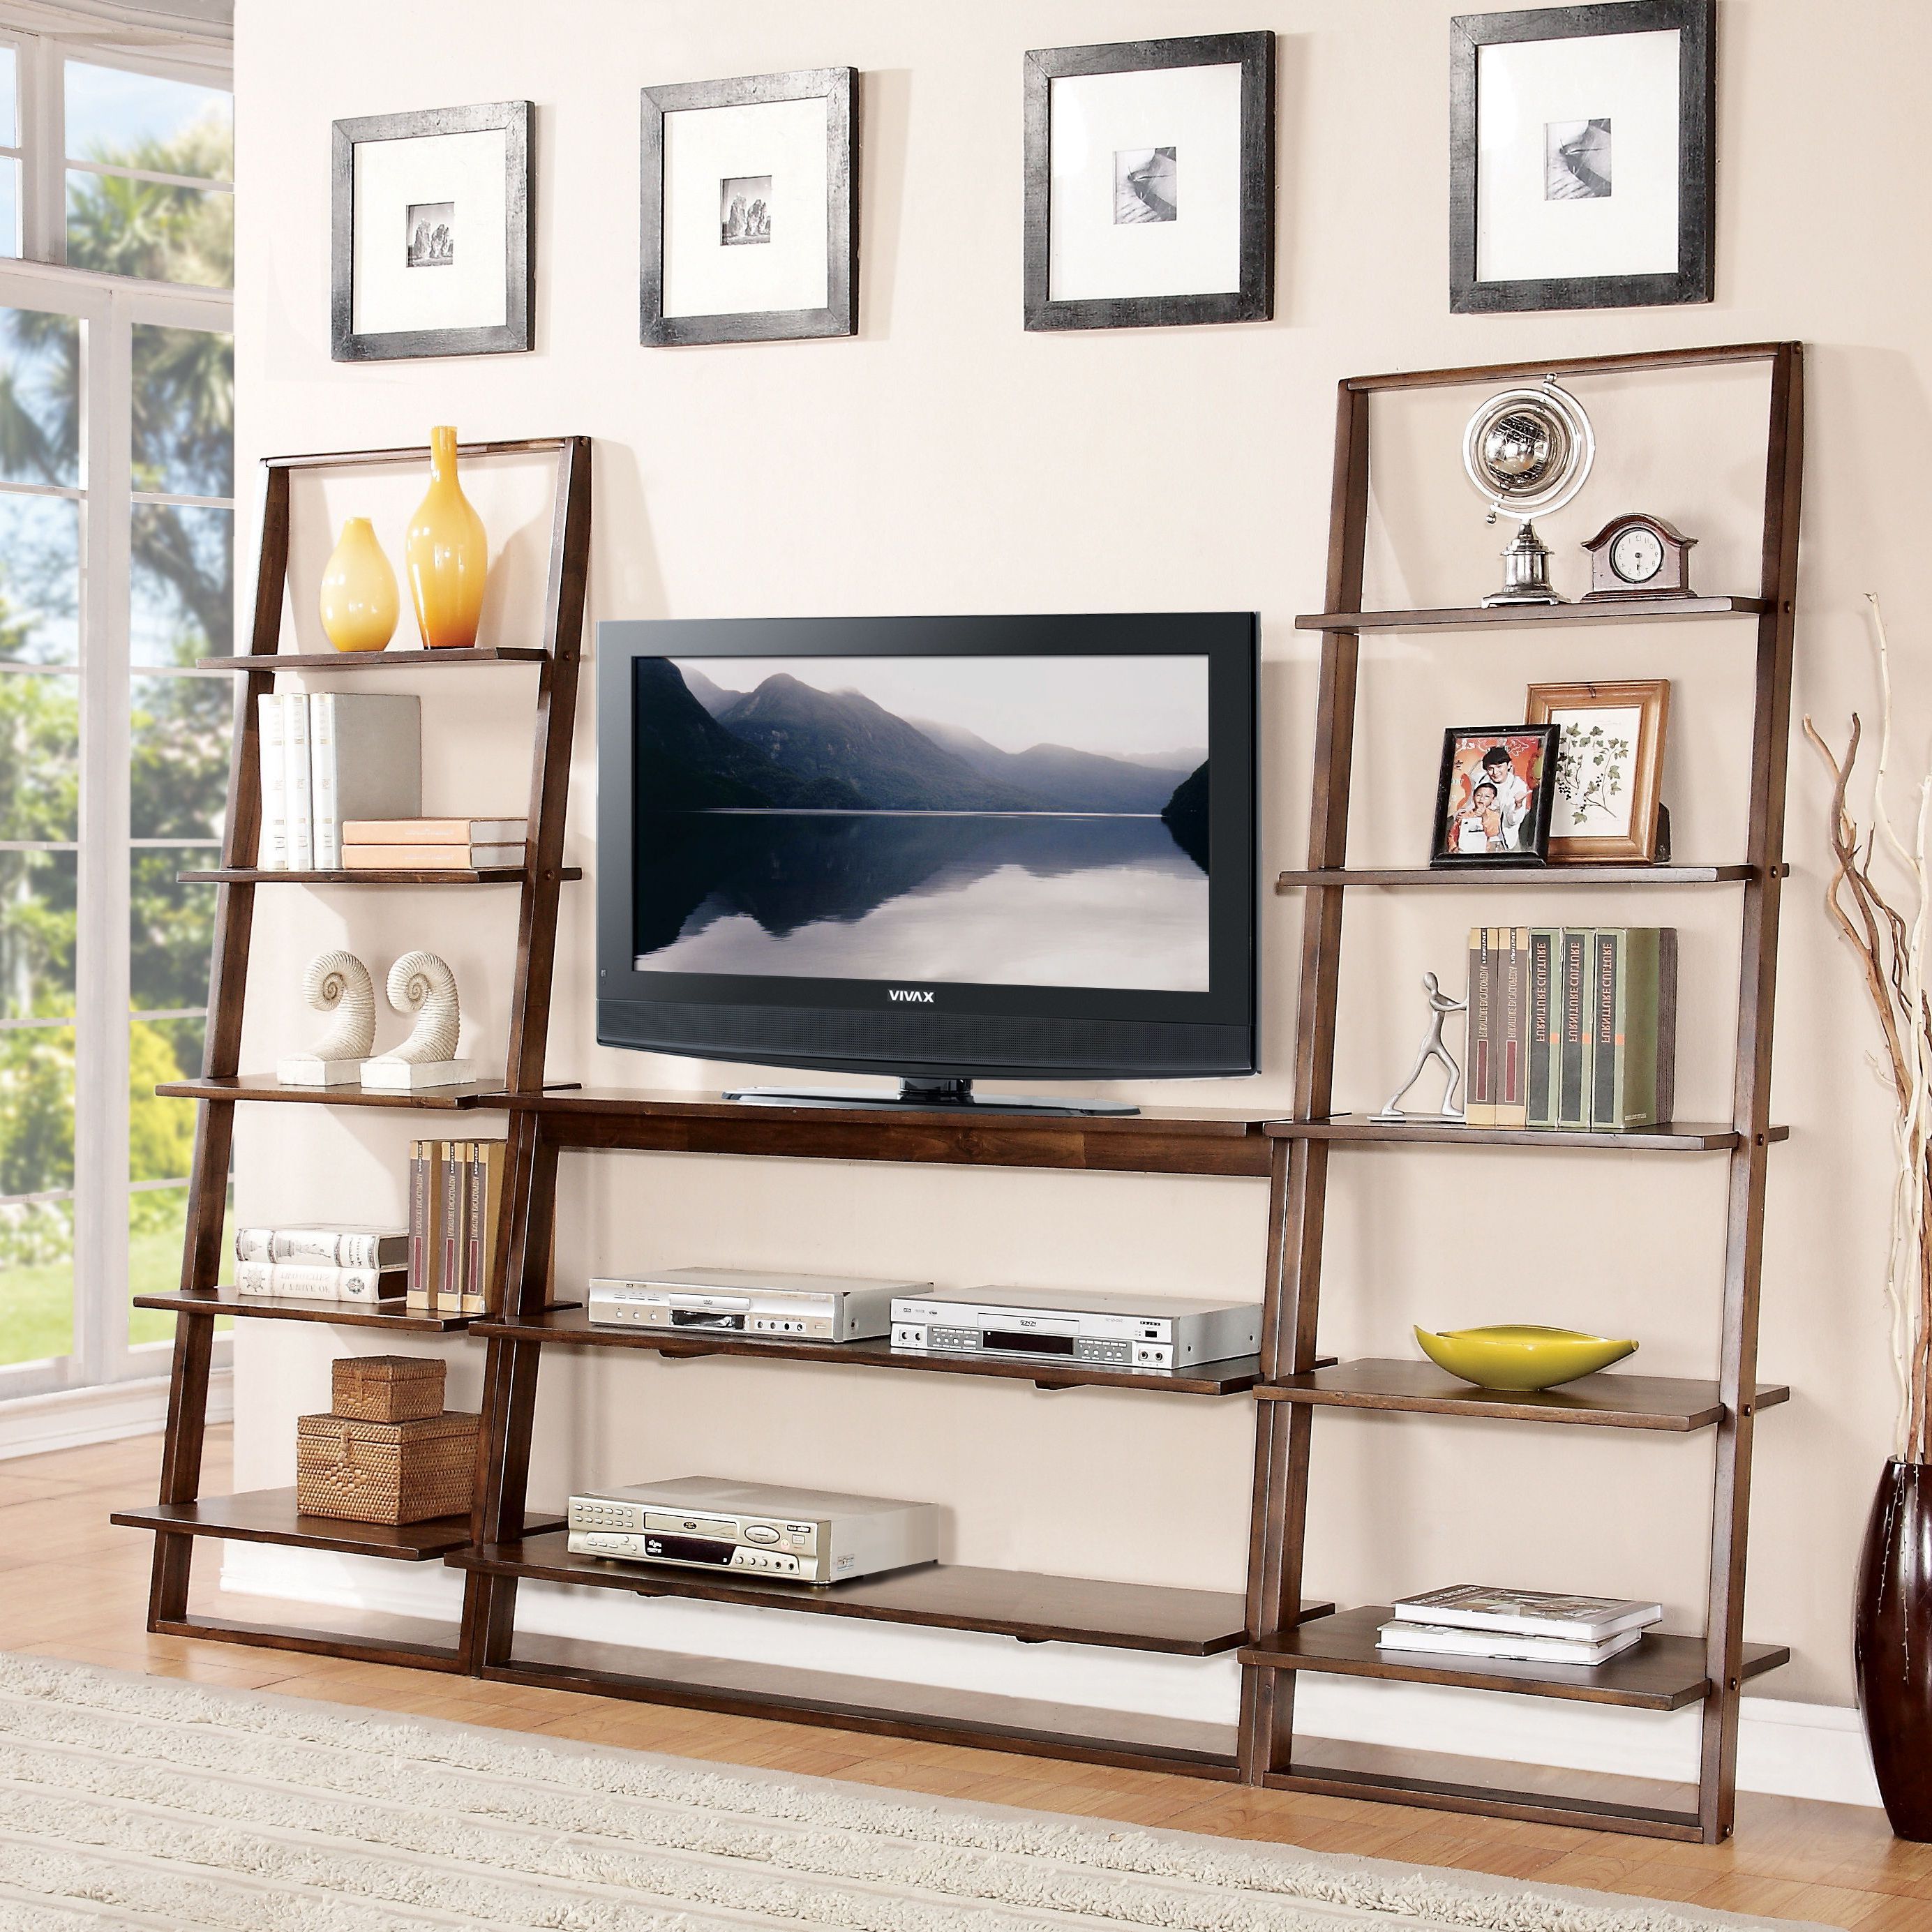 Tv Stands And Bookshelf With Regard To Most Up To Date Inspiring Space Saving Ideas Using Leaning Bookcase: Amazing Leaning (View 9 of 20)